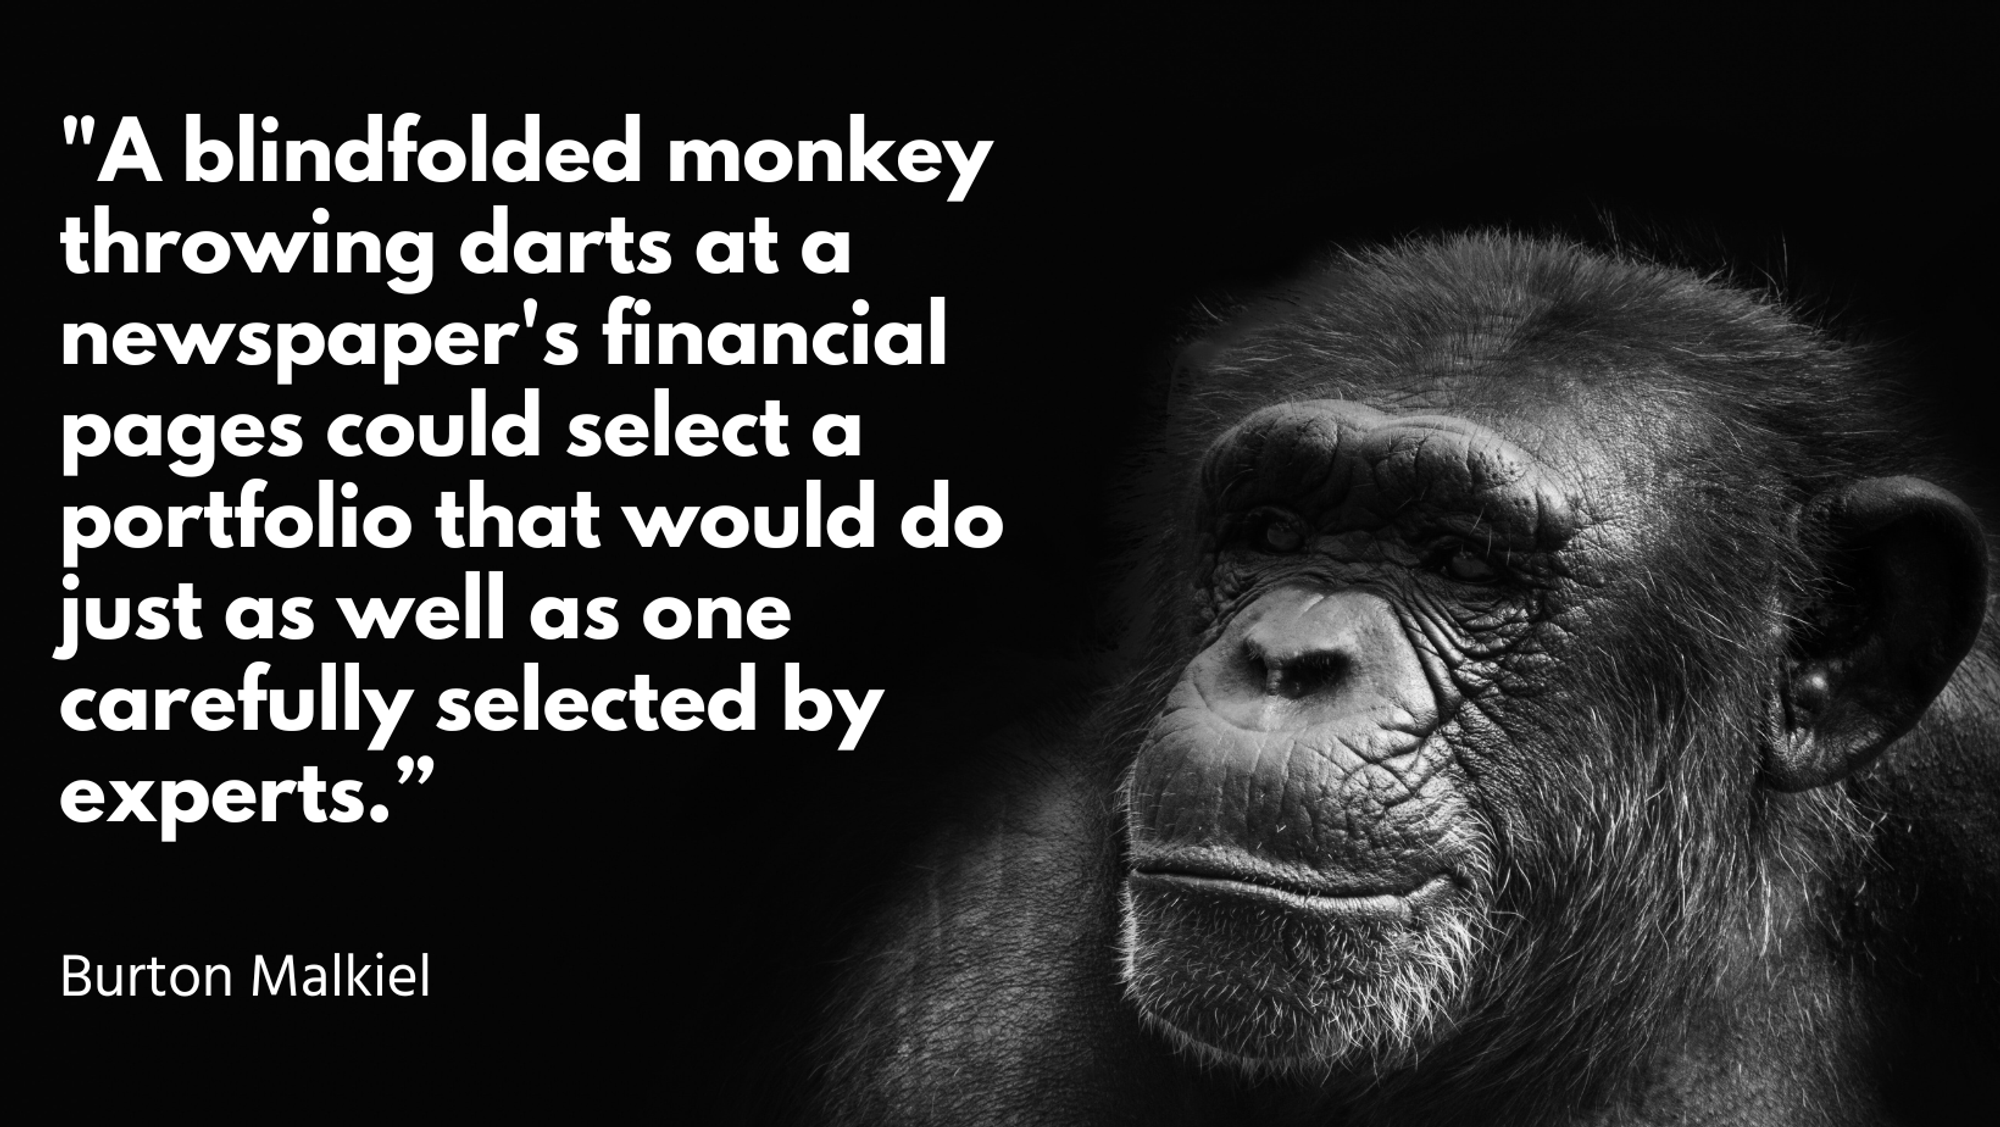 Should You Hire a Blindfolded Monkey?